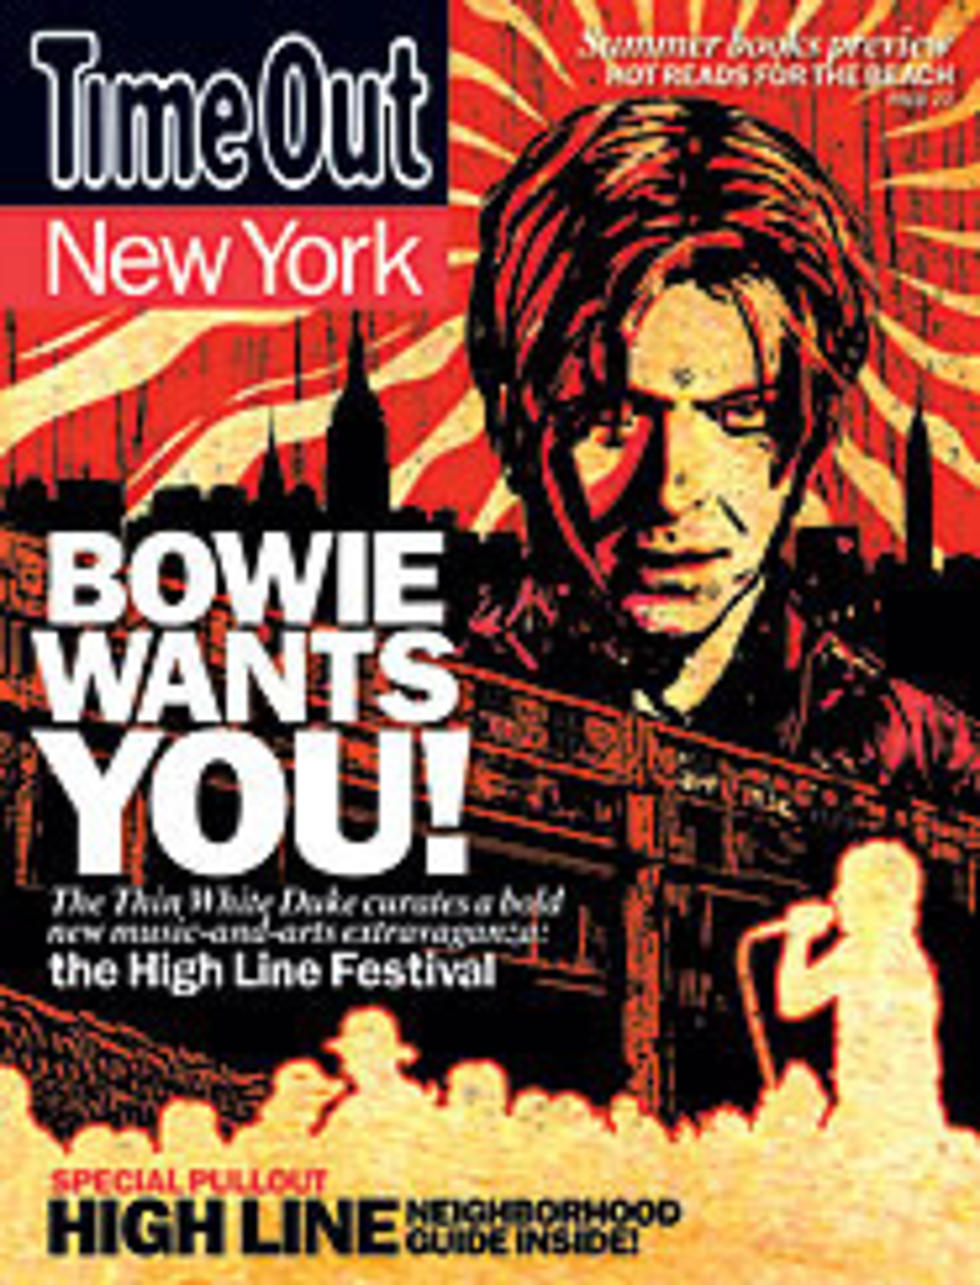 David Bowie&#8217;s High Line &#8216;Festival&#8217; almost here &#8212; David talks to Time Out, Ricky Gervais, Laurie Anderson, etc.